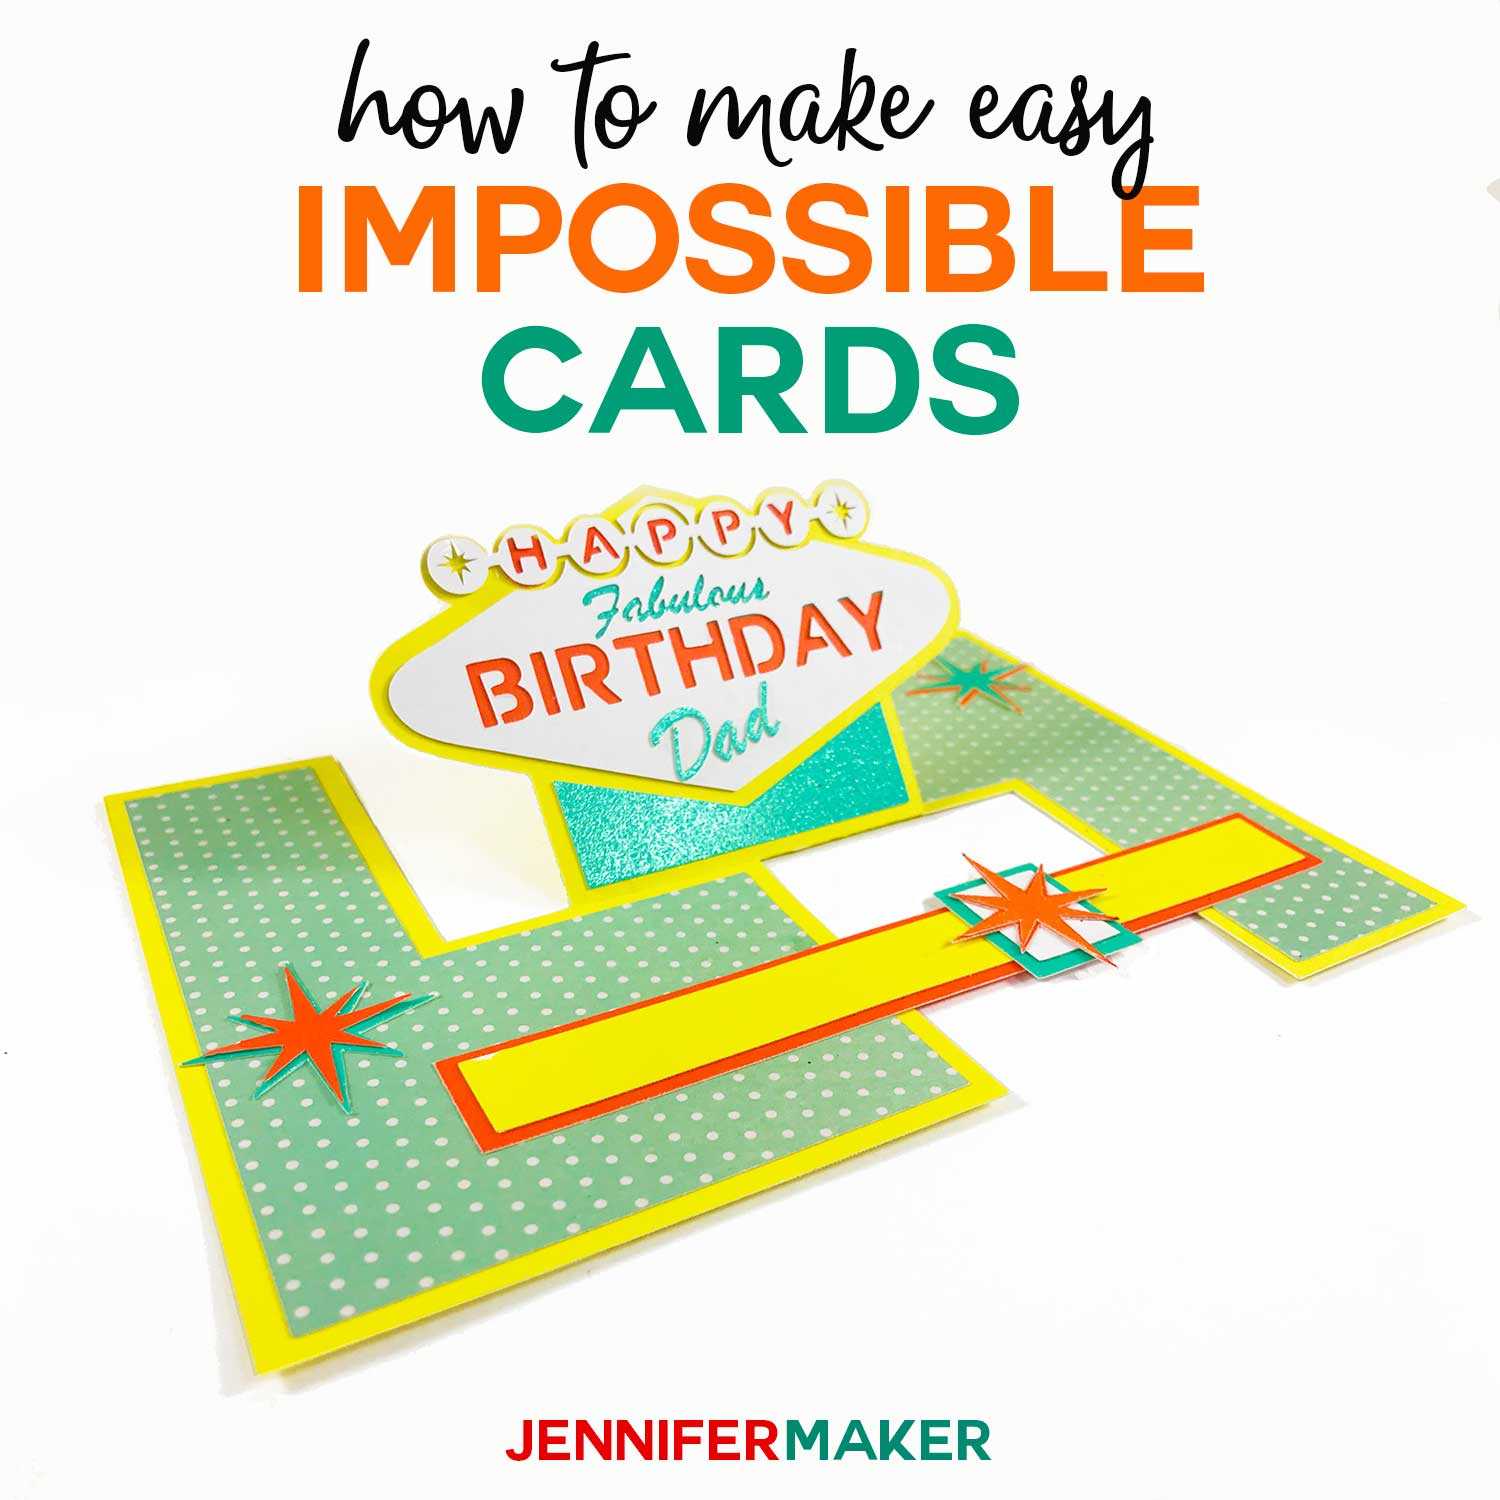 Impossible Card Templates: Super Easy Pop Up Cards Intended For Free Printable Pop Up Card Templates